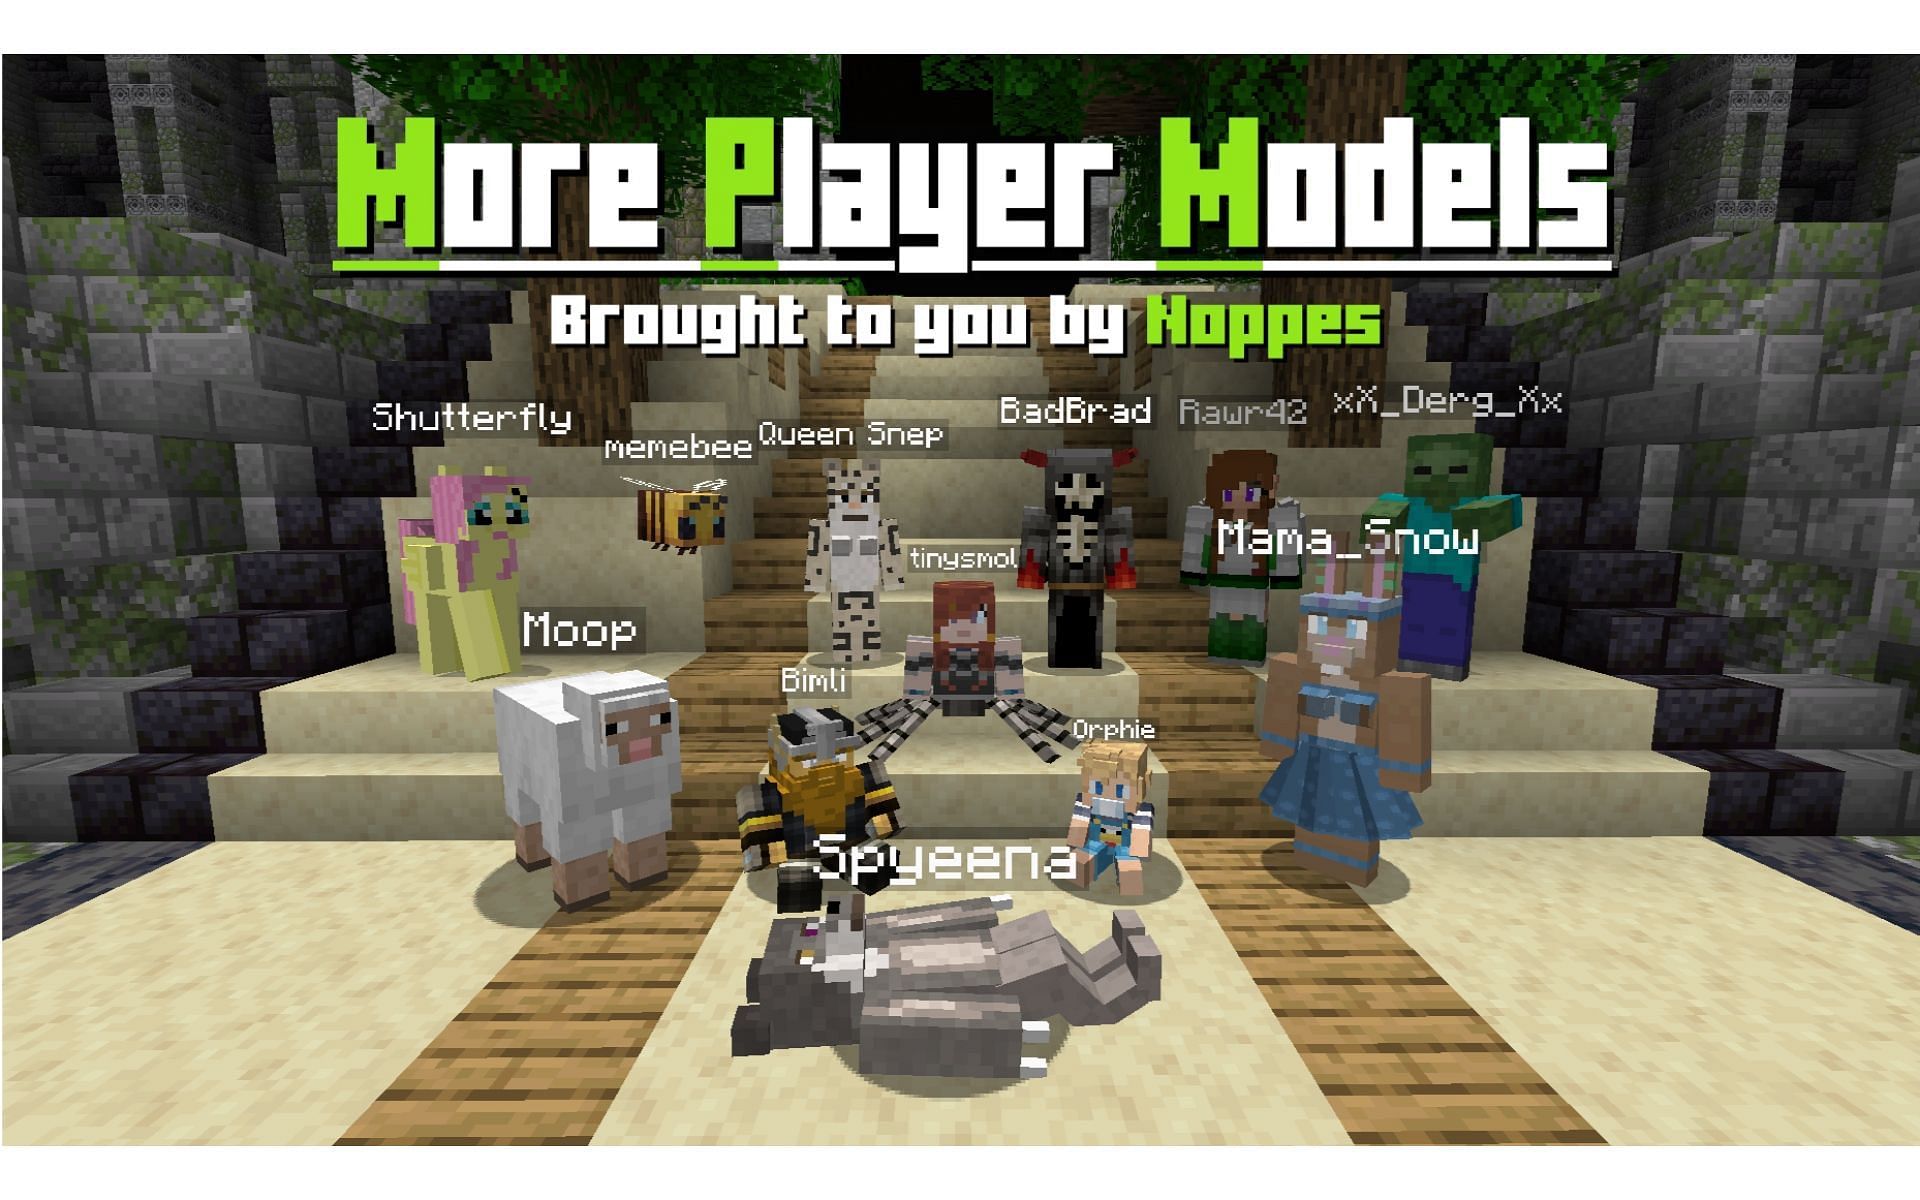 Players can morph into mobs as well as create custom character animations. (Image via CurseForge)